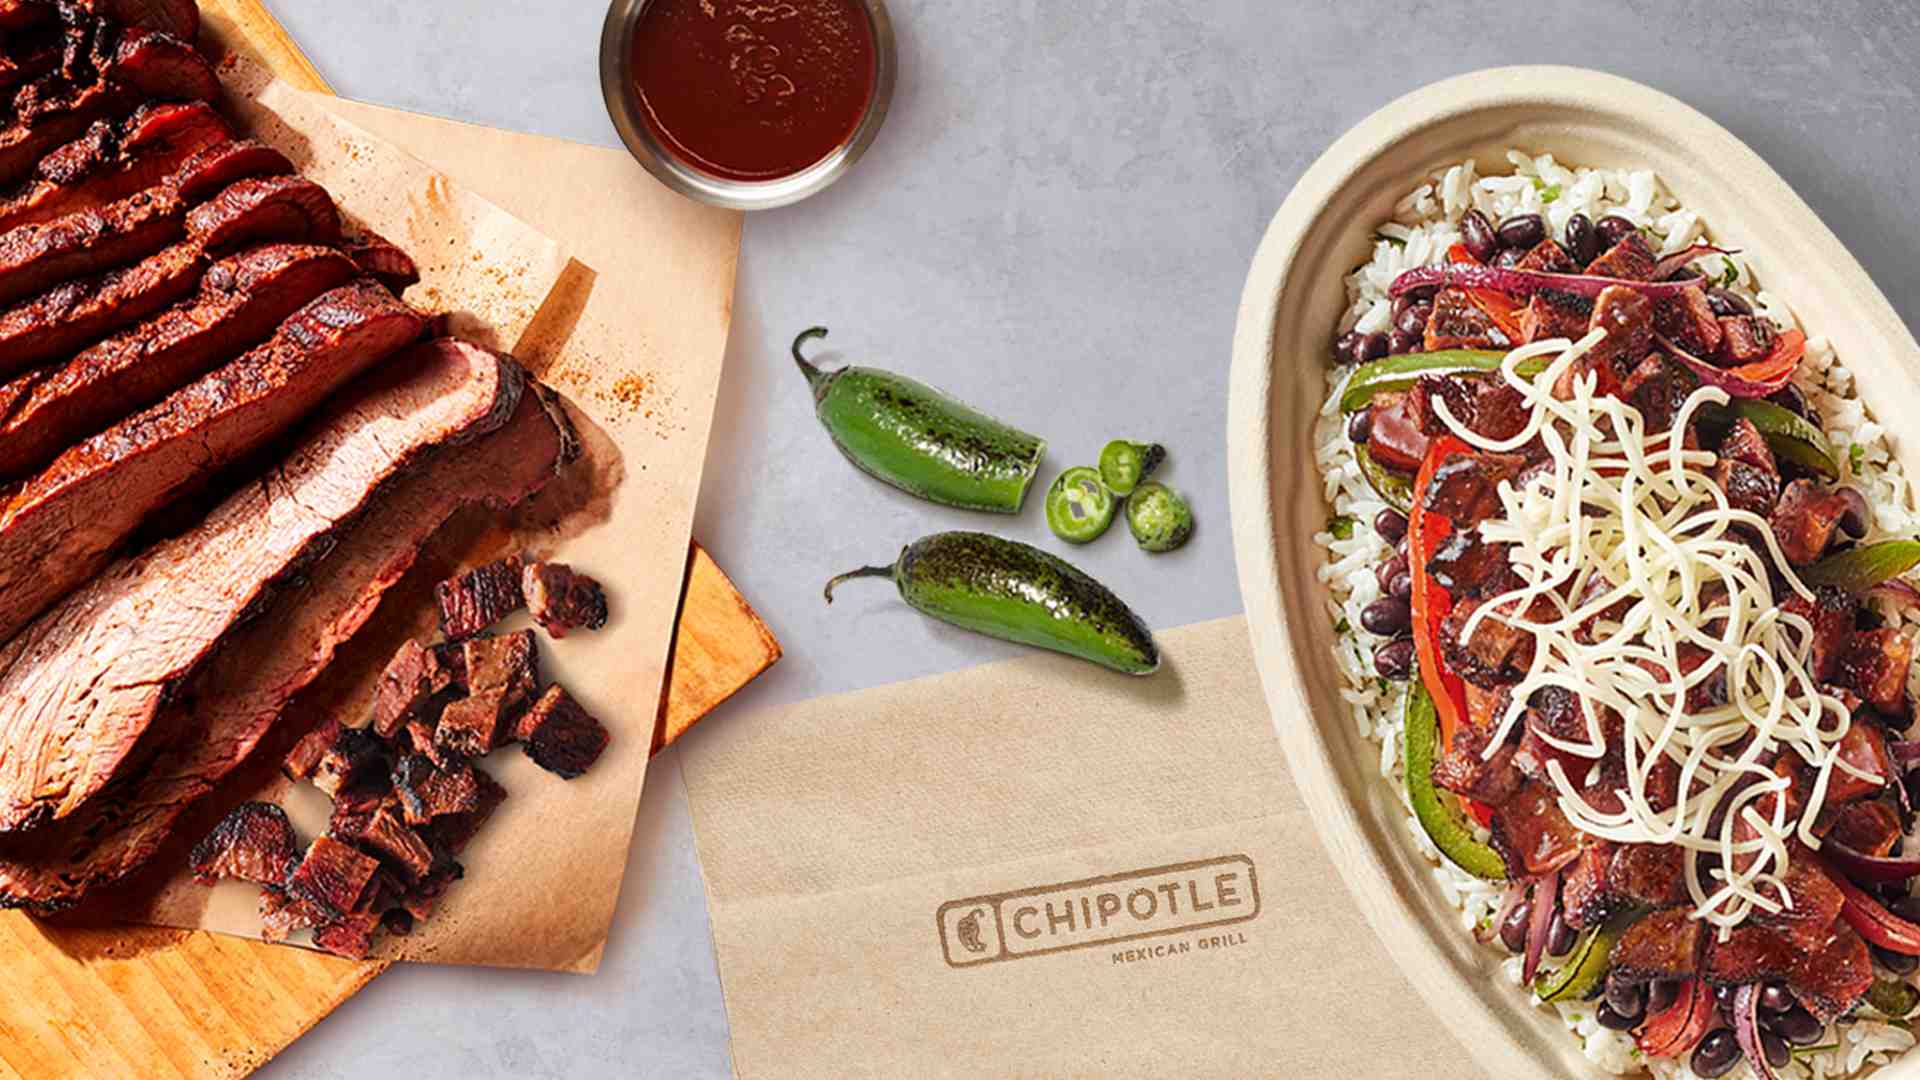 Does chipotle sauce have gluten?